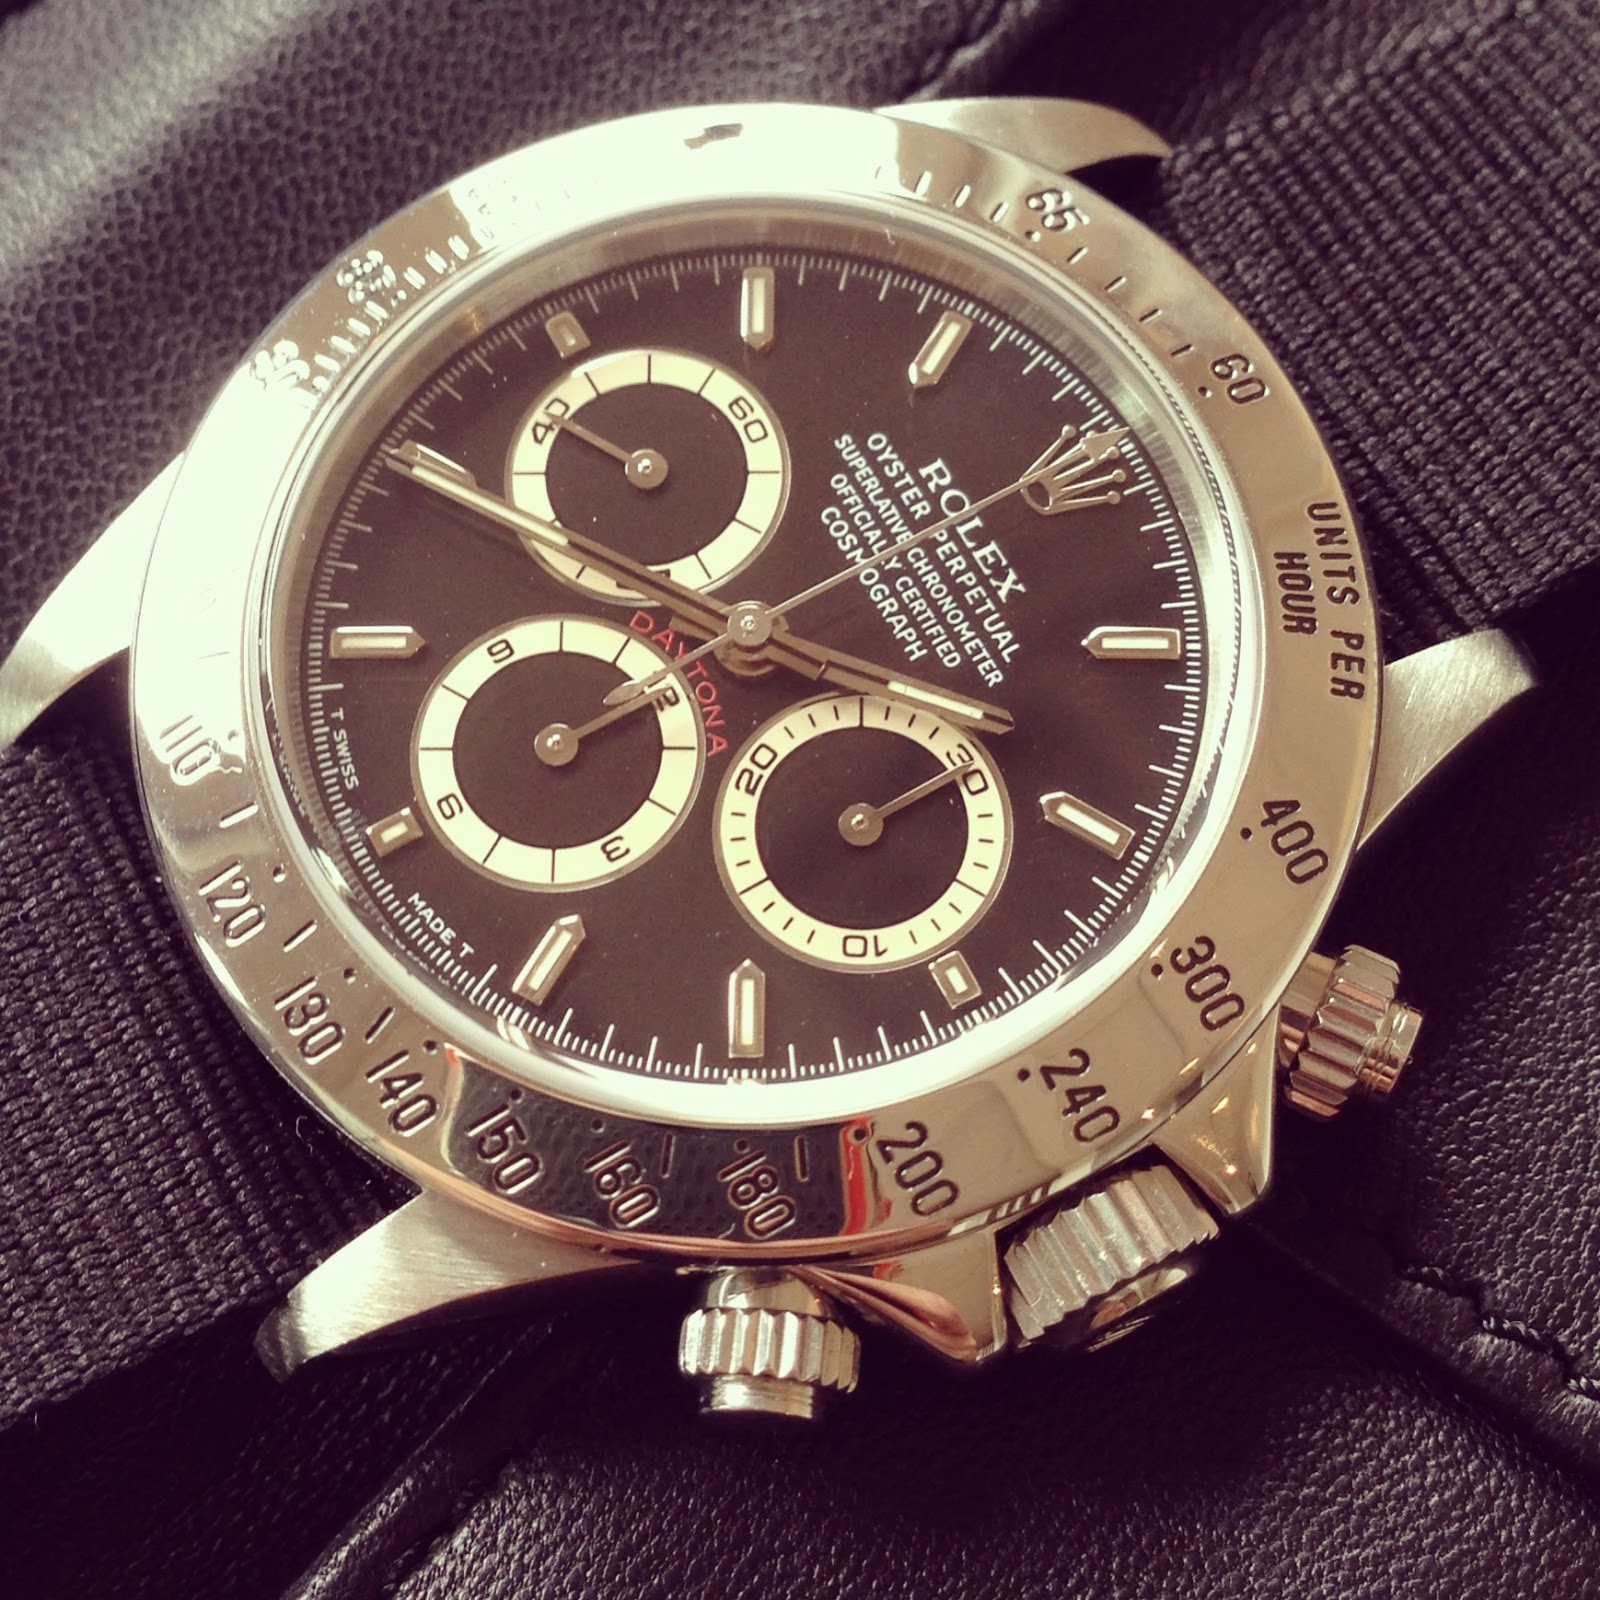 VINTAGE ROLEX DAYTONA COSMOGRAPH 16520 - SO CALLED PATRIZZI DIAL ...